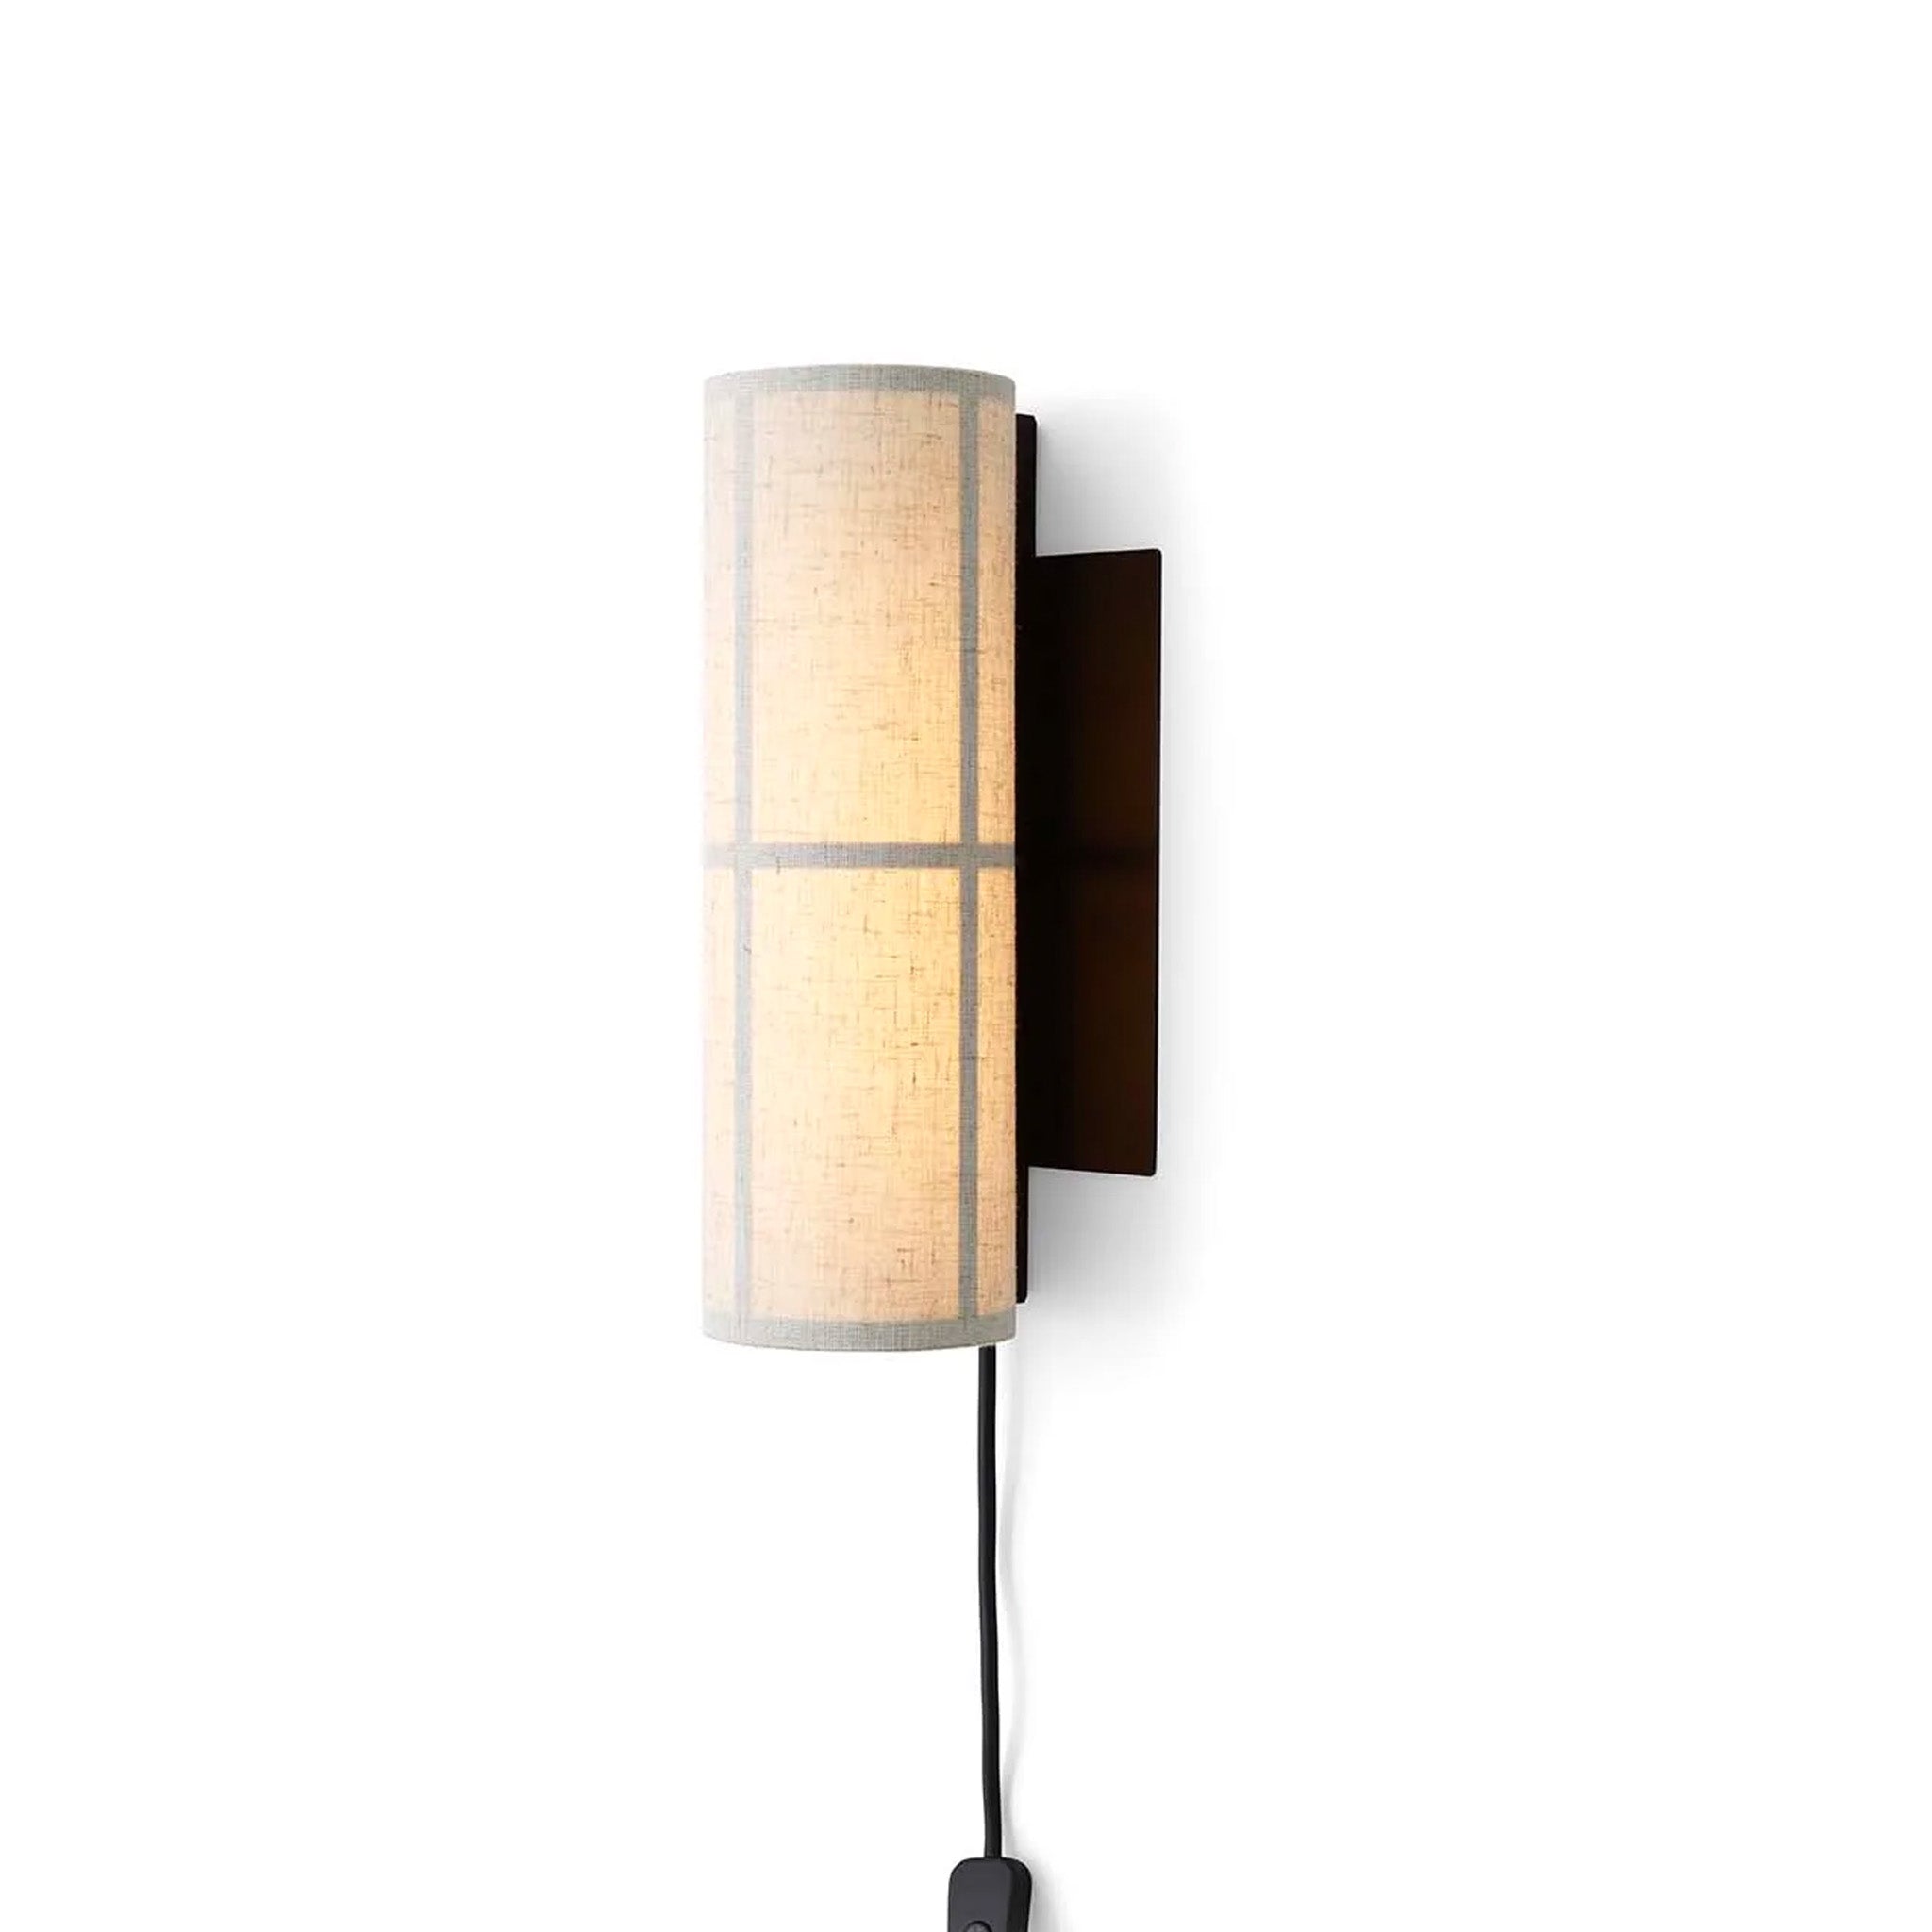 Hashira Wall Lamp by Norm Architects